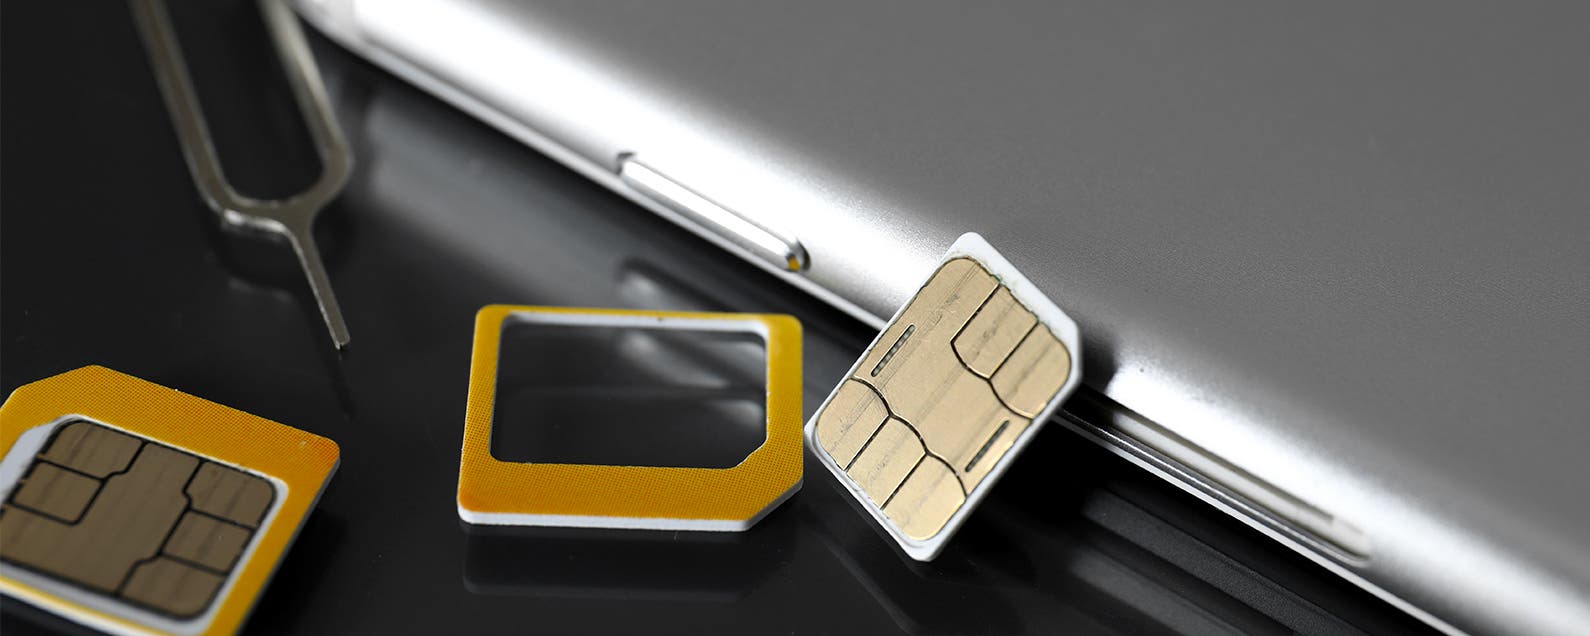 How to Switch the SIM Card on Your iPhone